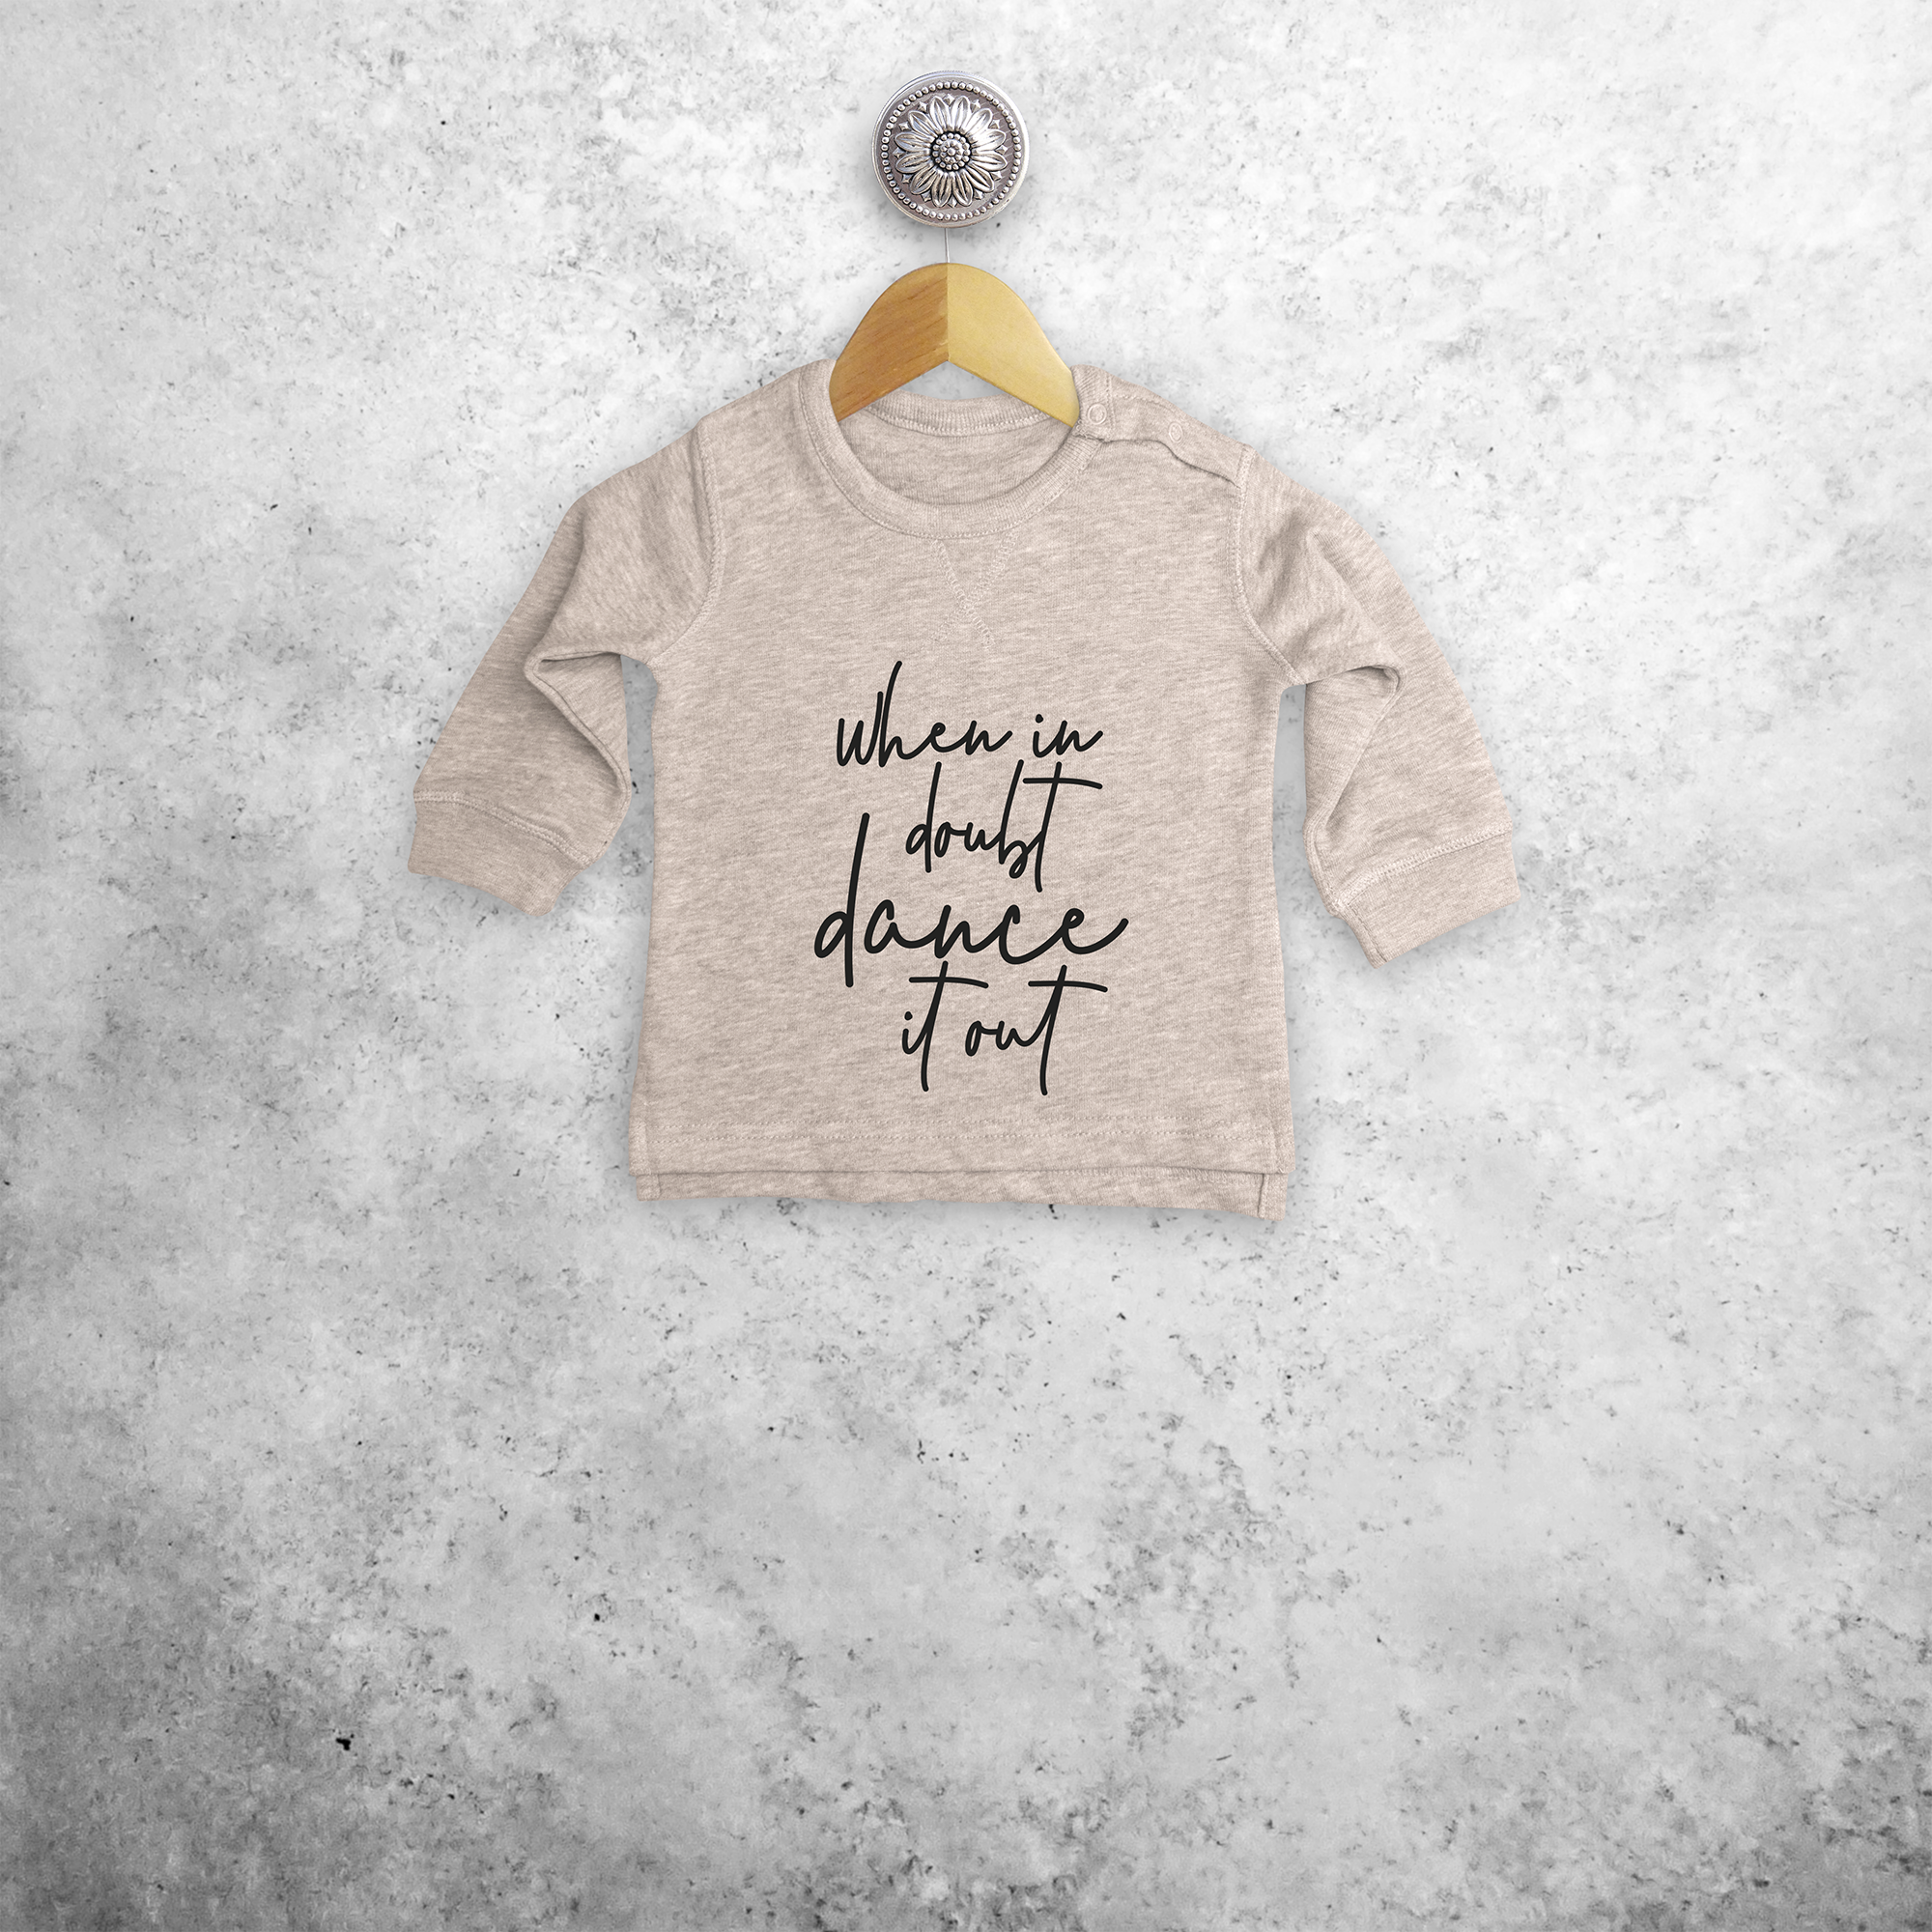 'When in doubt dance it out' baby sweater